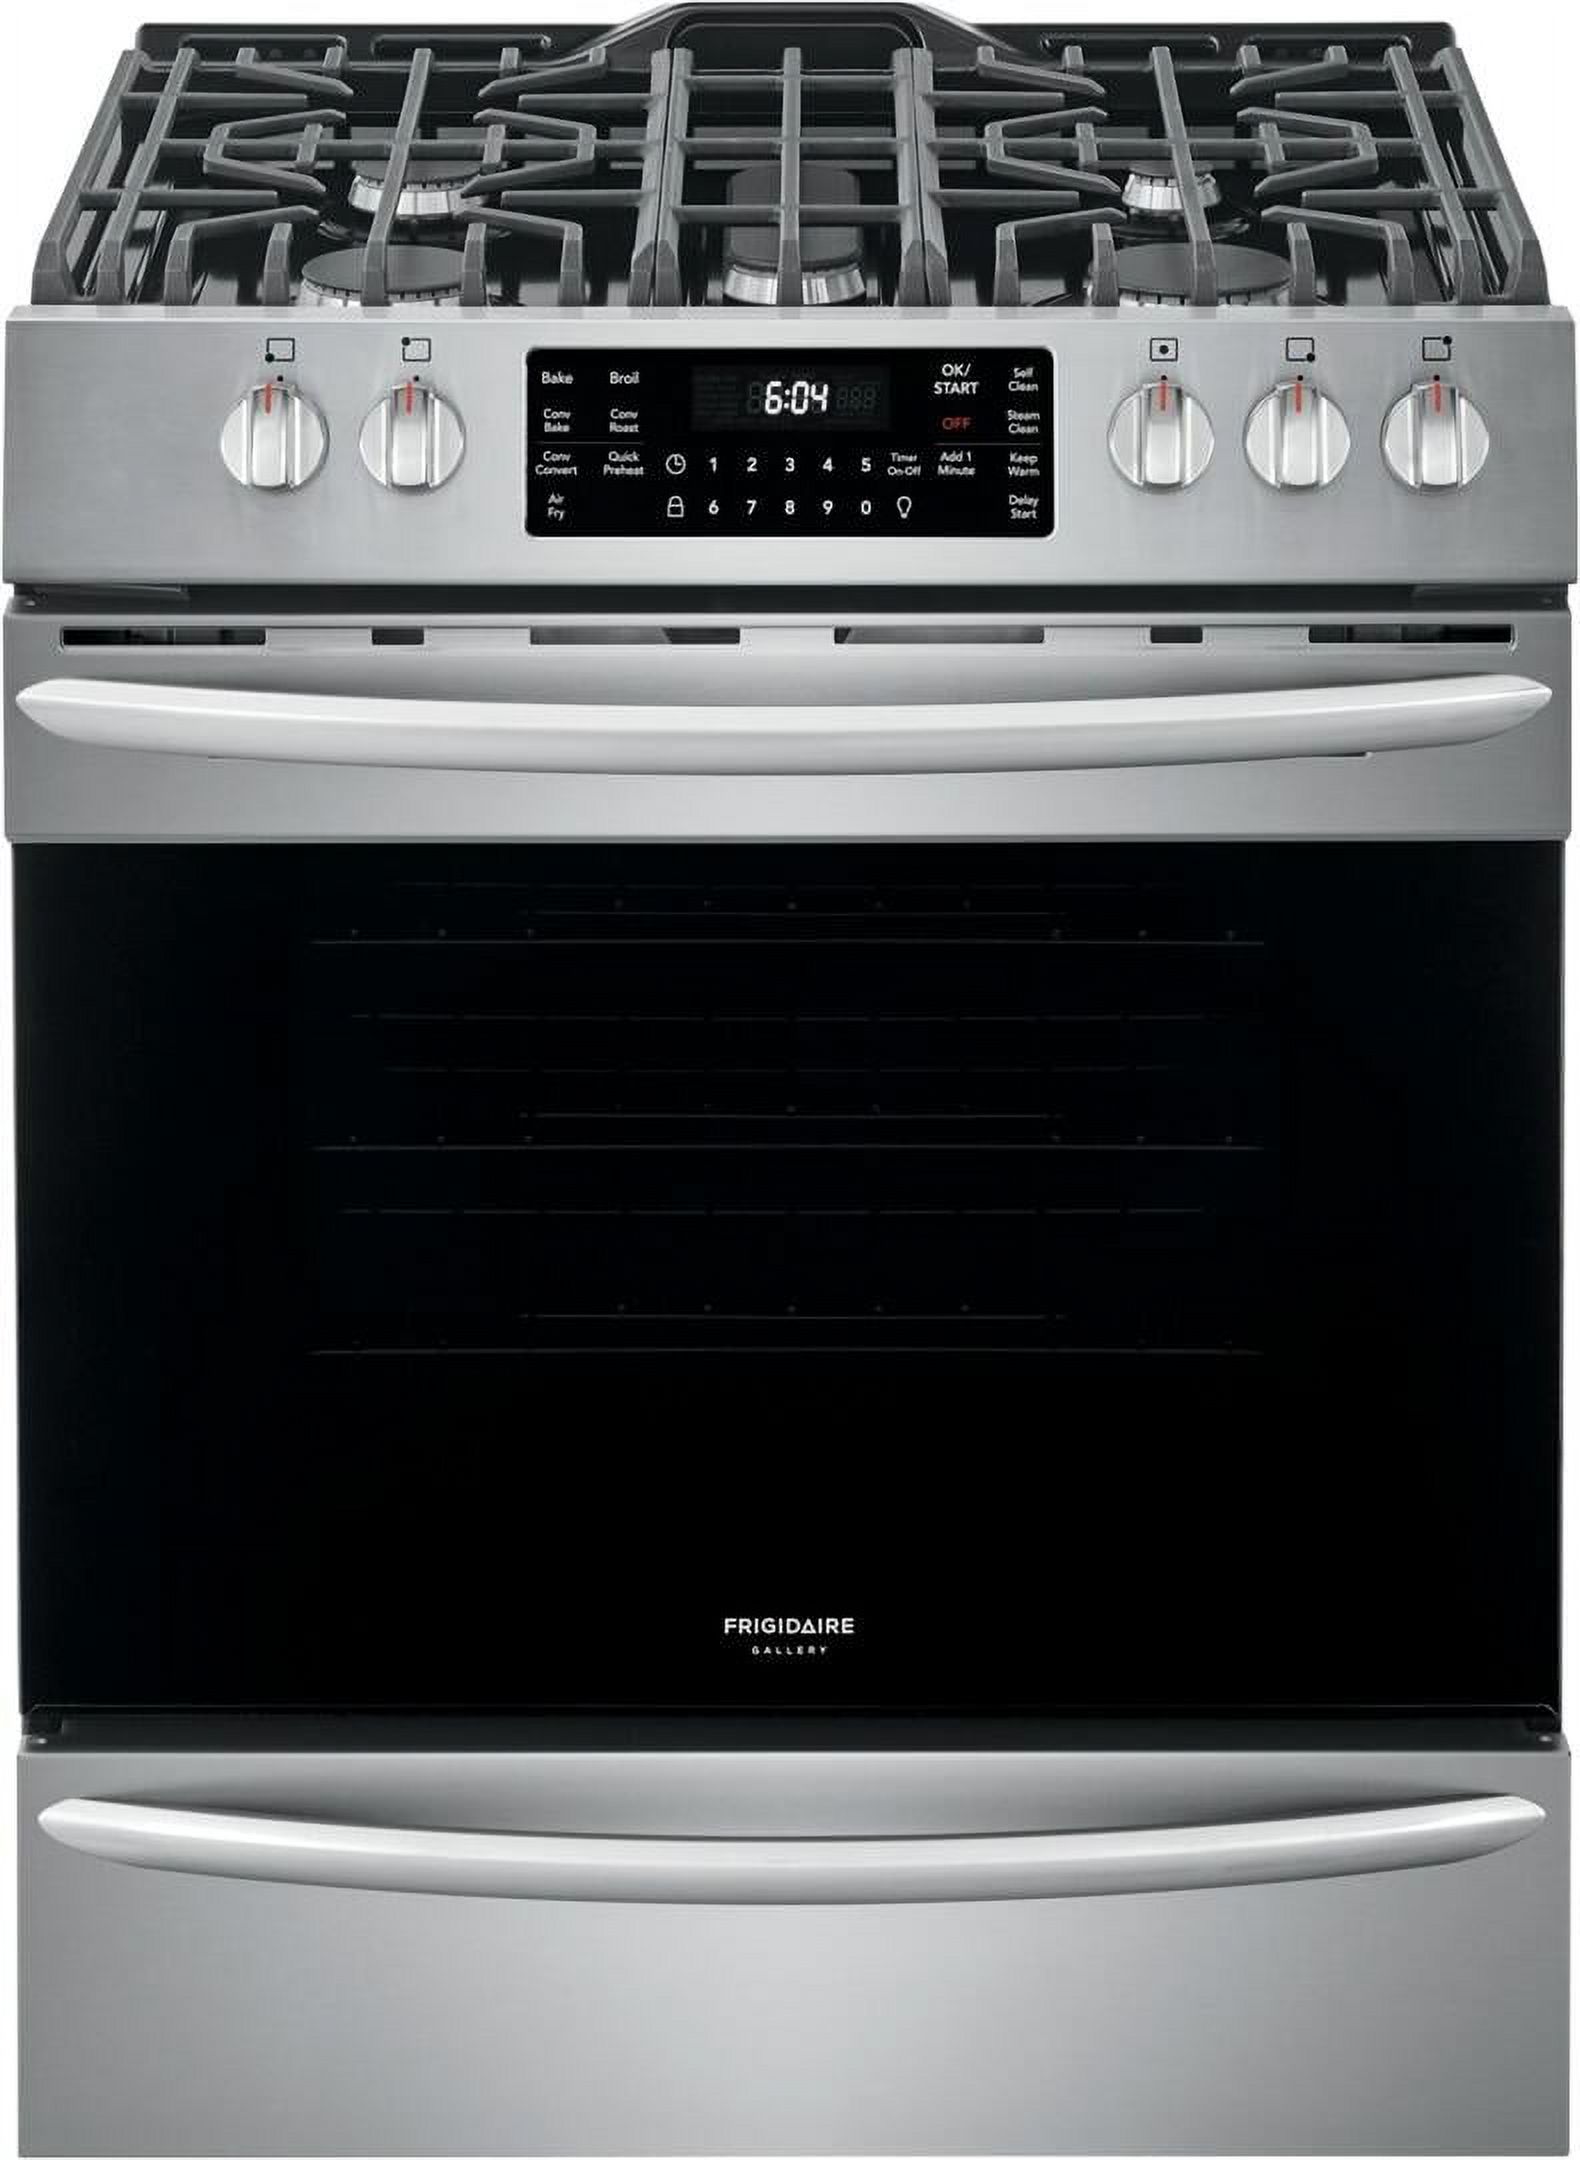 Frigidaire FGGH3047VF 30 Gallery Series Gas Range with 5 Sealed Burners griddle True Convection Oven Self Cleaning Air Fry Function in Stainless Steel - image 7 of 14